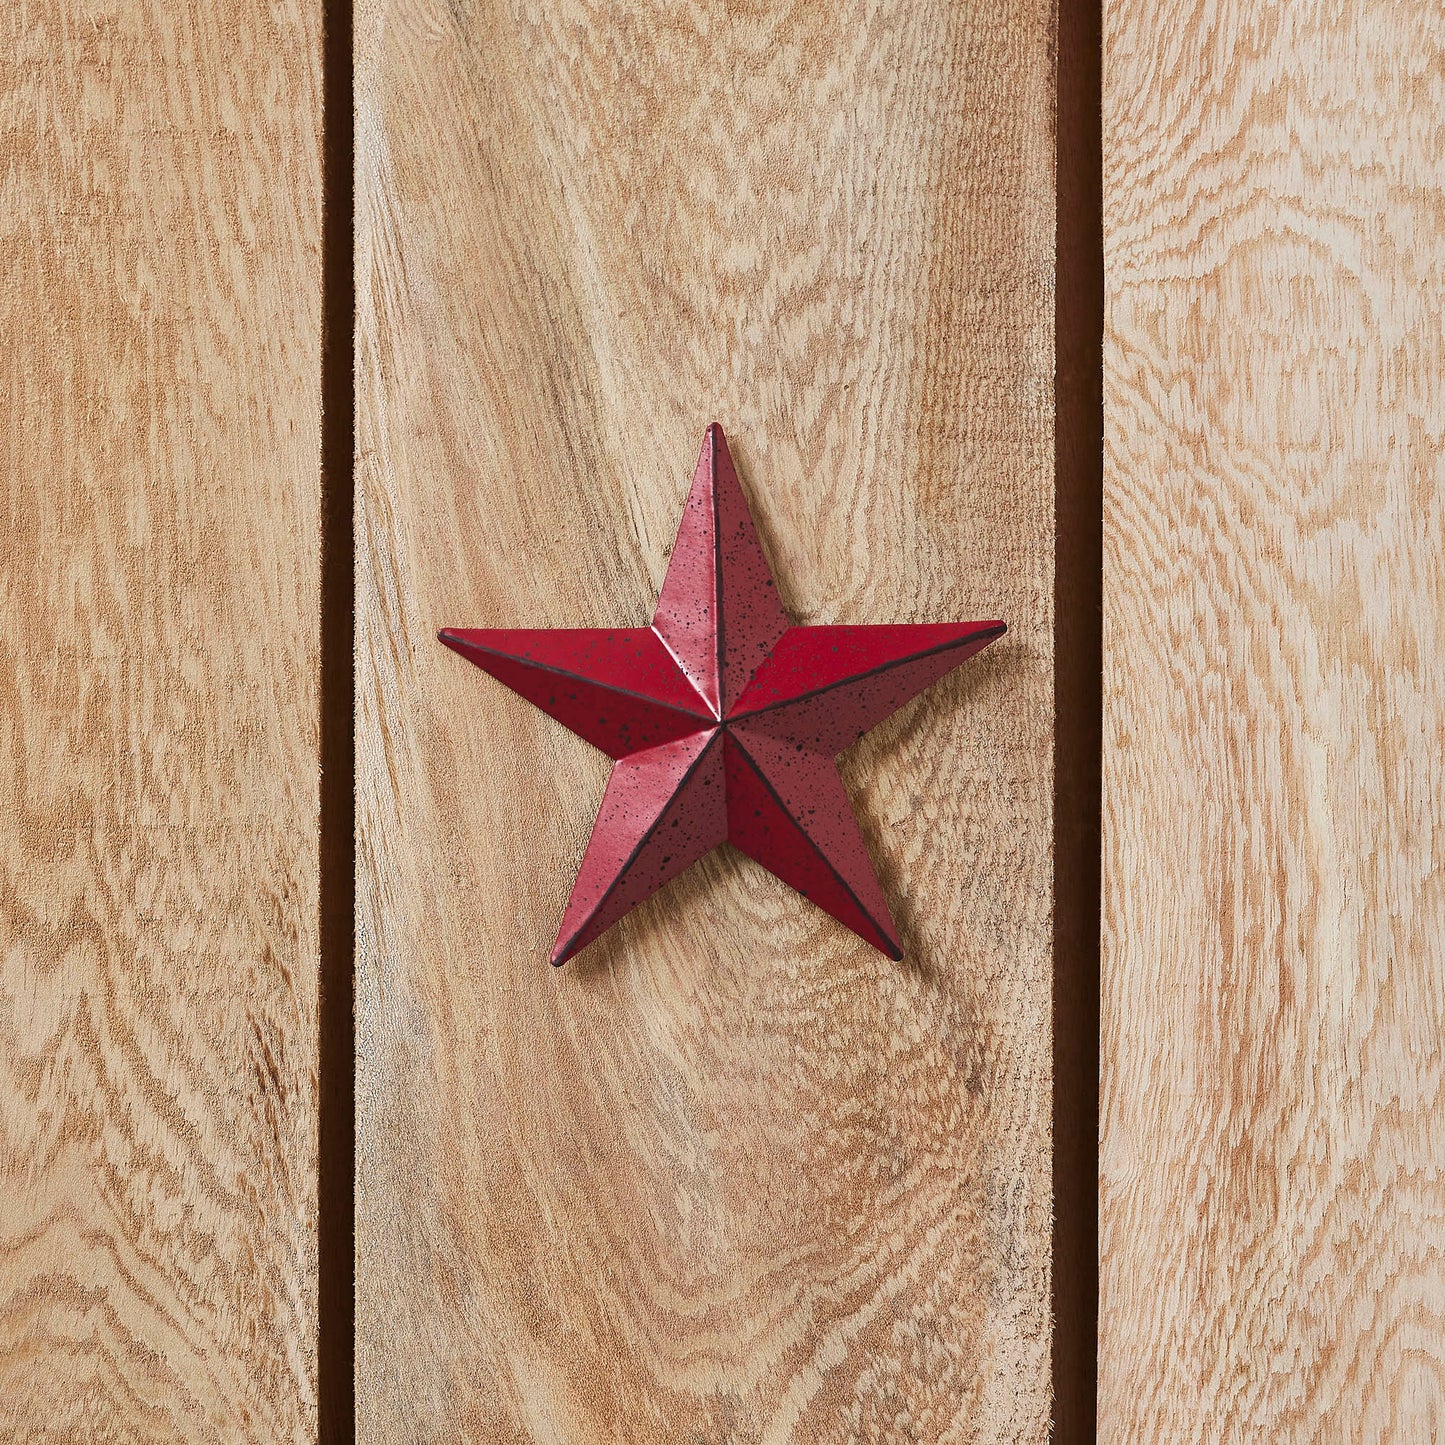 VHC Brands Patriotic Faceted Metal Star Burgundy Wall Hanging 4x4, Independence Day Decor, American Star Design, Distressed Appearance Metal Wall Hanging,  Star Shape, Country, Burgundy